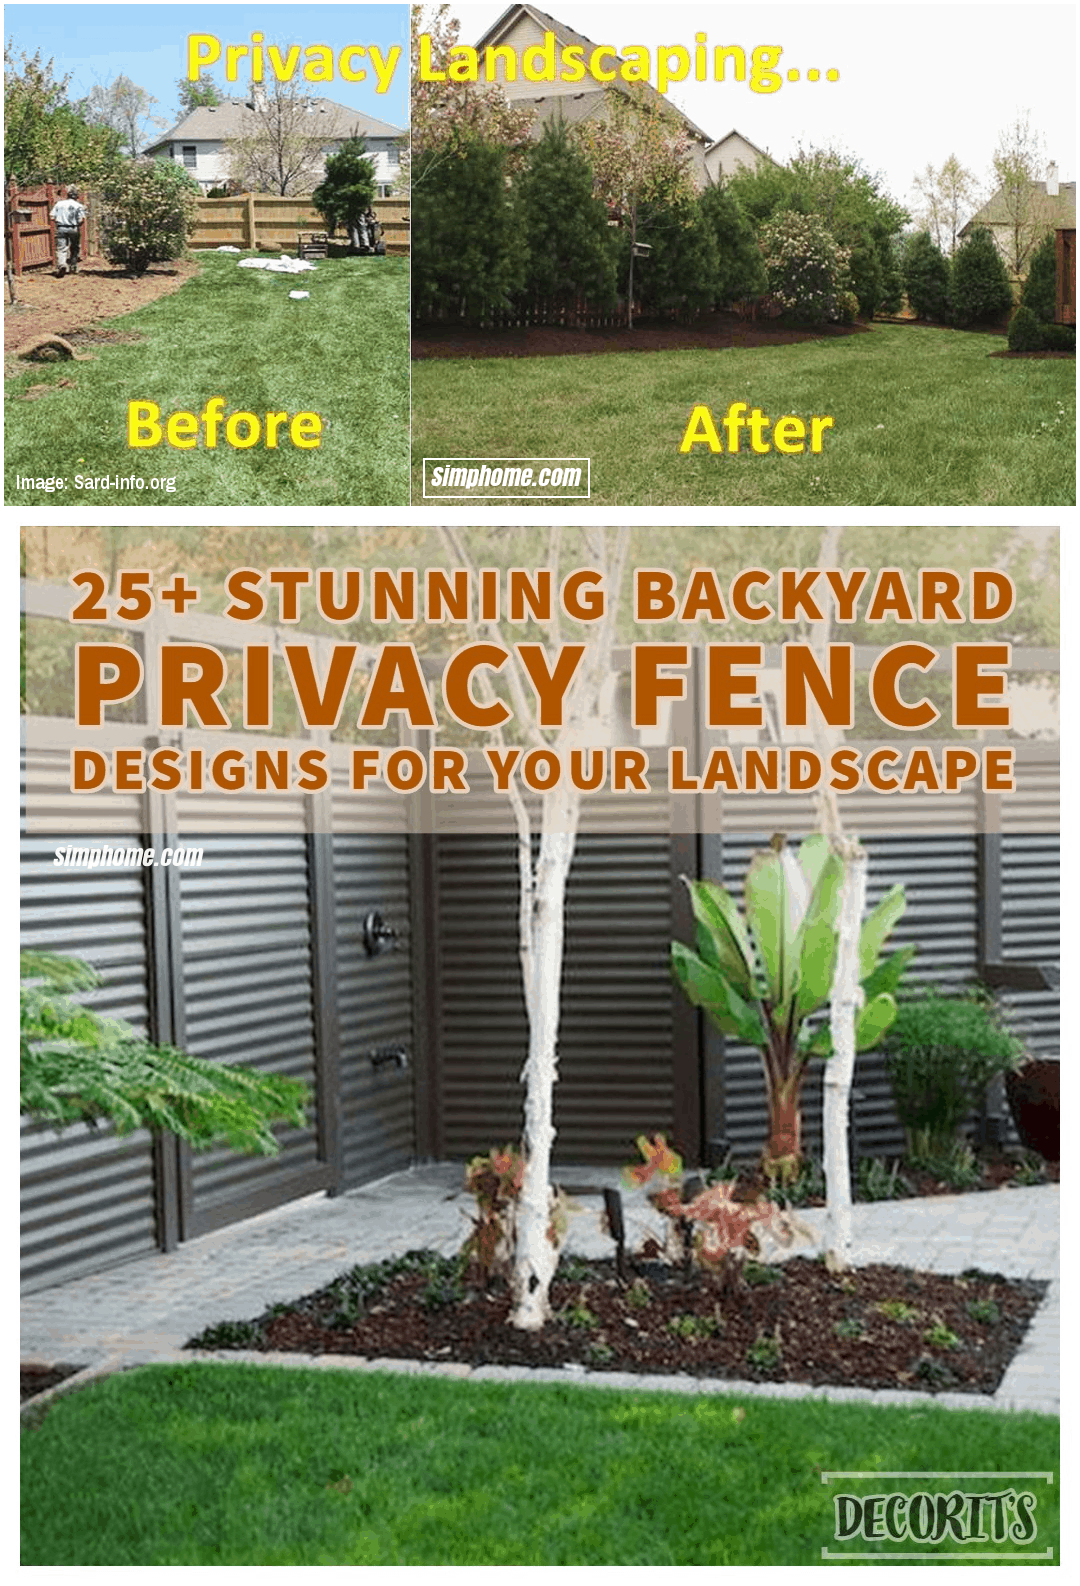 SIMPHOME.COM 10 Ideas how to make backyard privacy landscaping Privacy Landscaping Idea